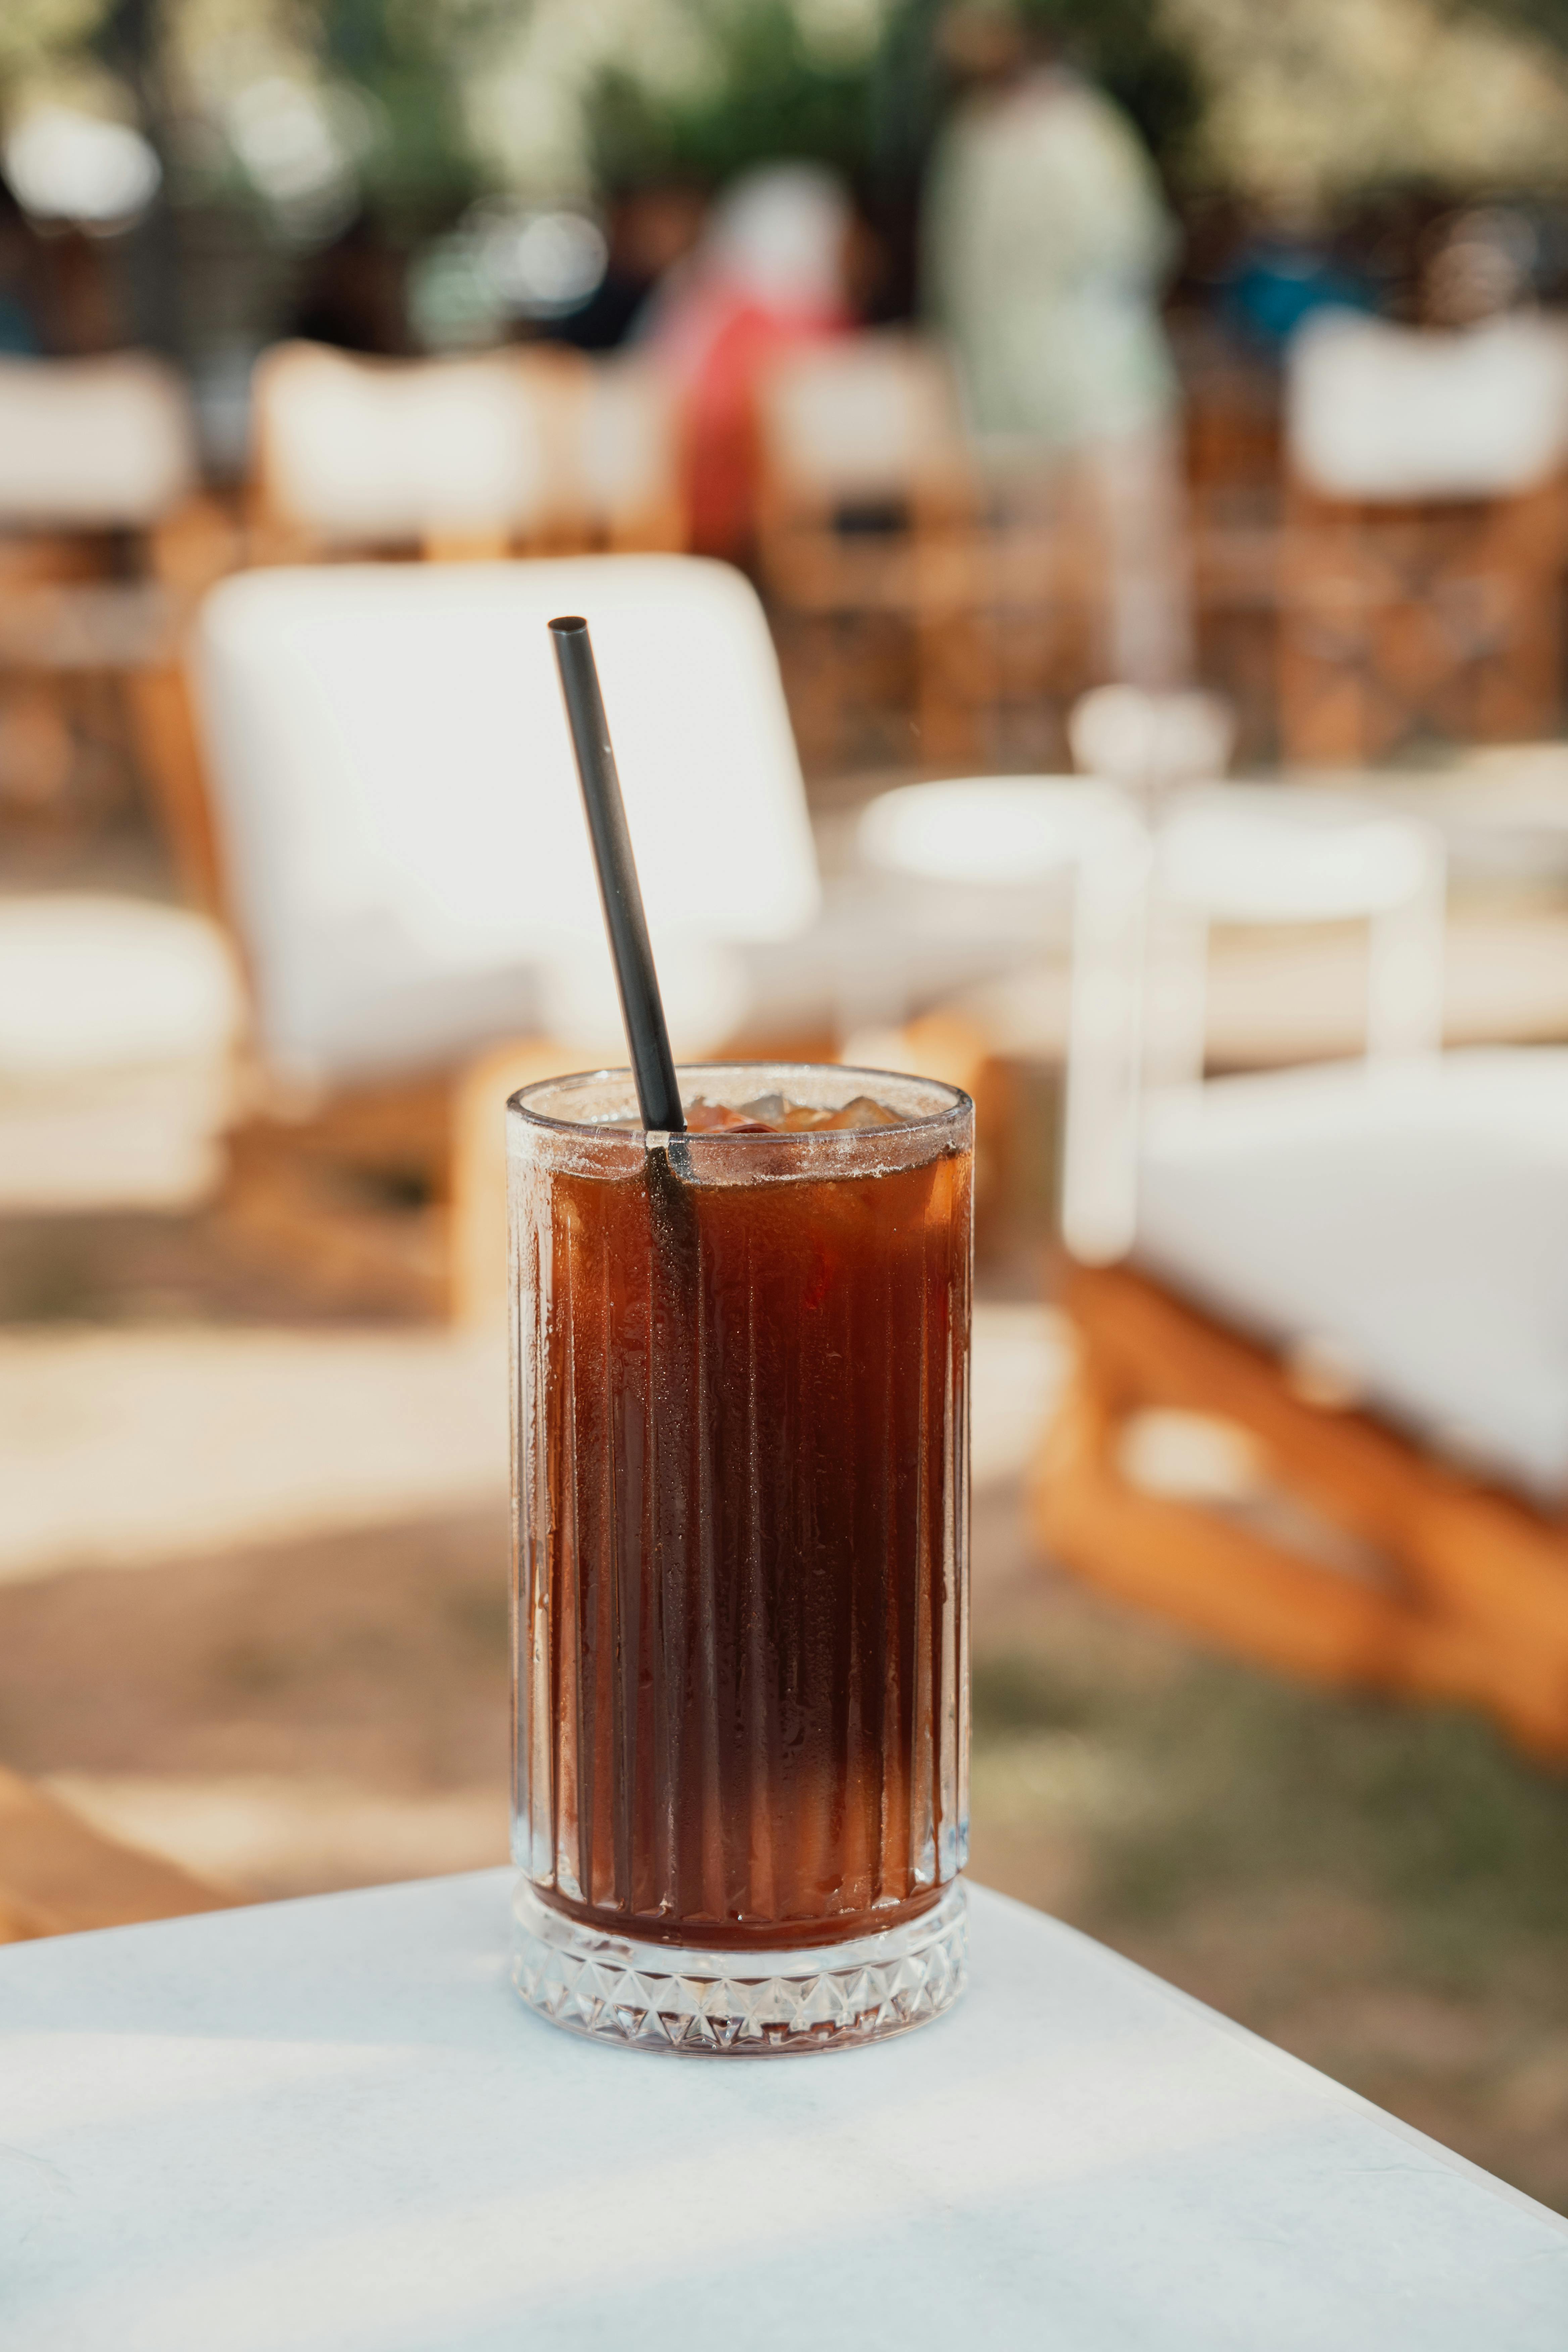 Iced coffee drink on glass jar with straw. Stock Photo by Civil